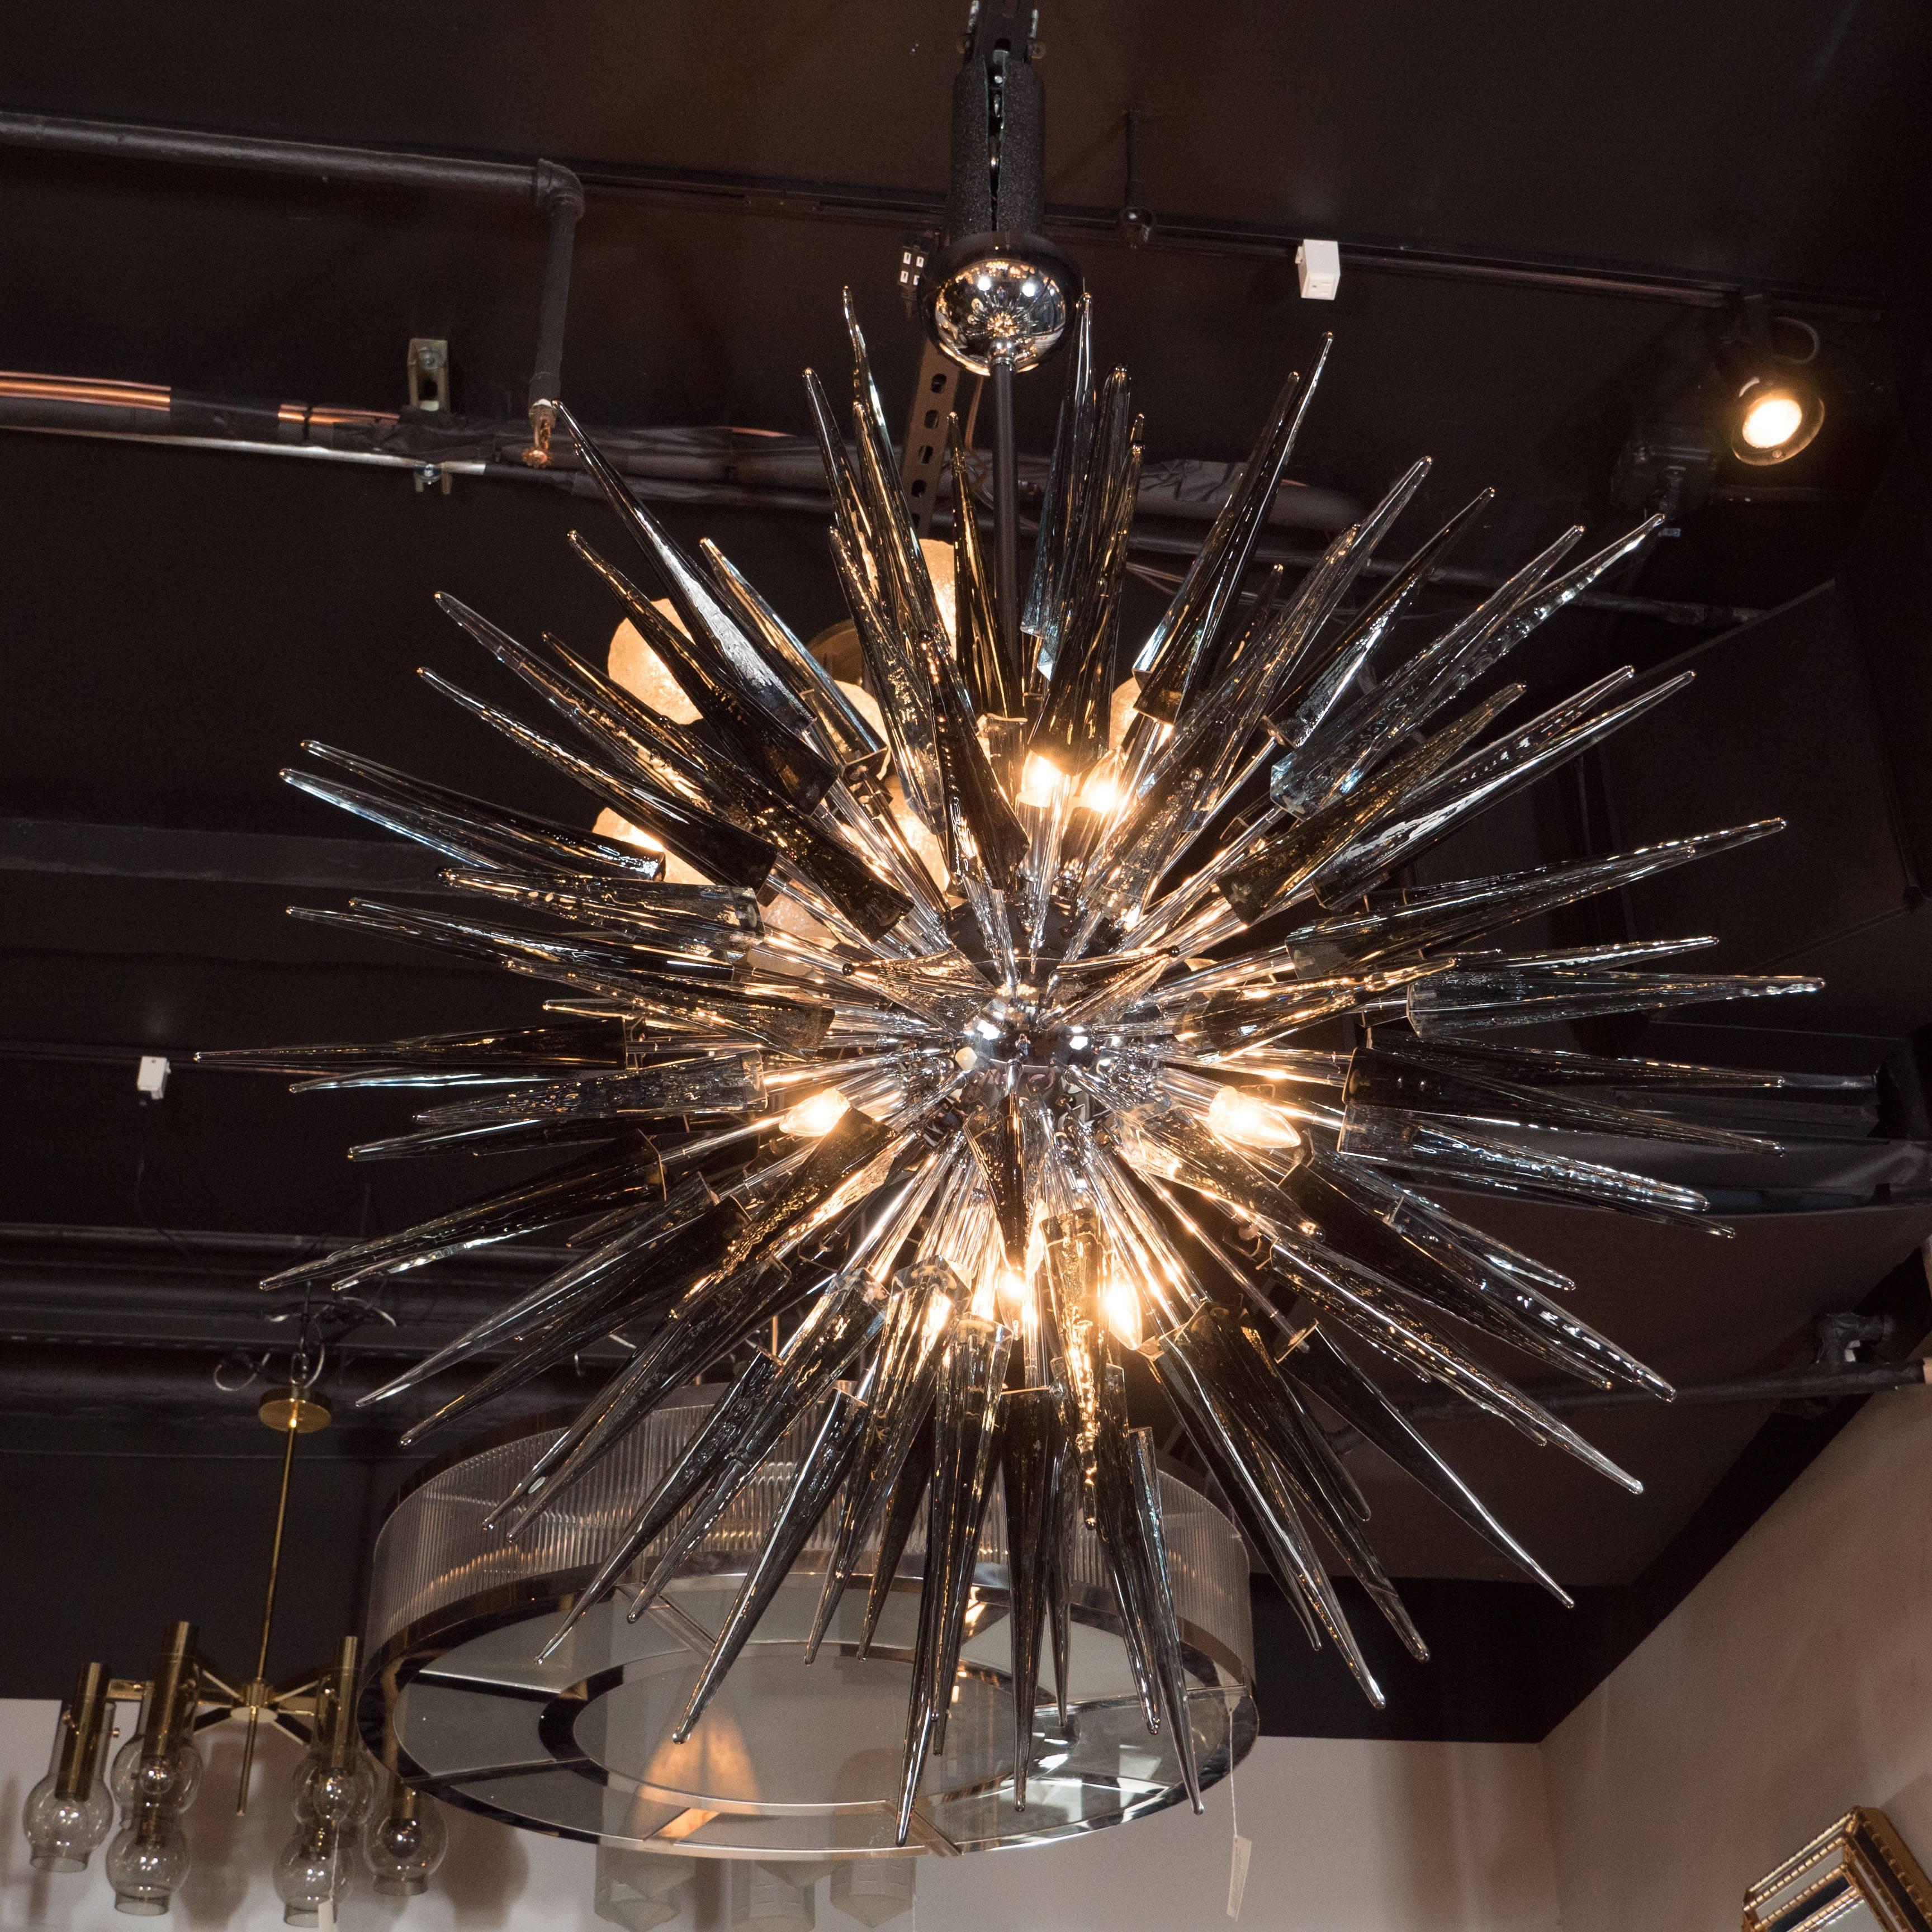 This stunning smoked grey Murano glass spiked starburst chandelier was hand blown in Italy circa 2000. It features an abundance of spiked rods emanating from its center in alternating lengths, giving its overall form a staggered